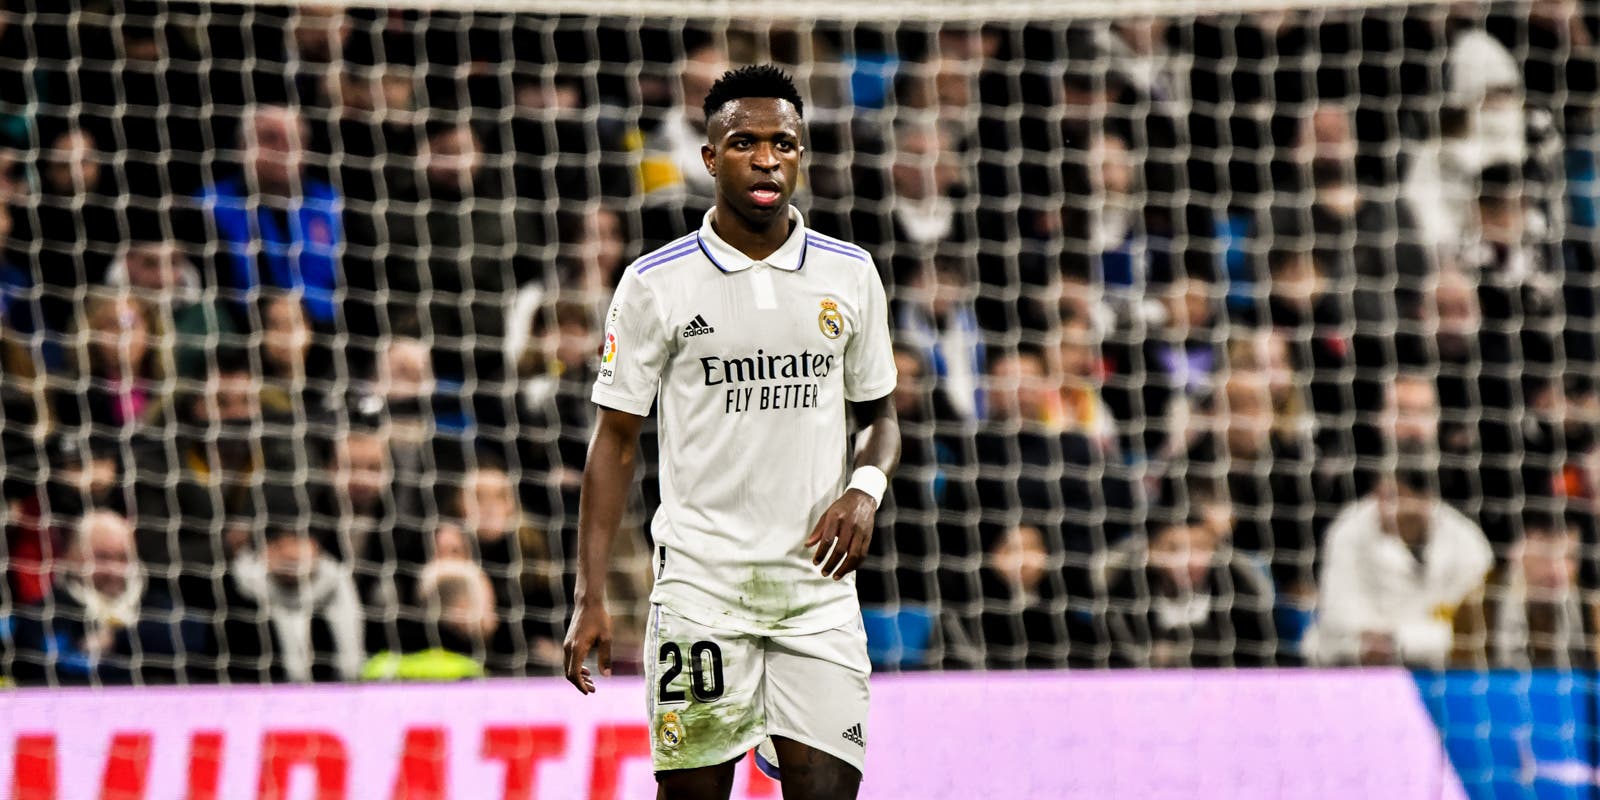 Tertuliano from El Chiringuito cries out to heaven after LaLiga's embarrassment with Vinicius Jr
	
